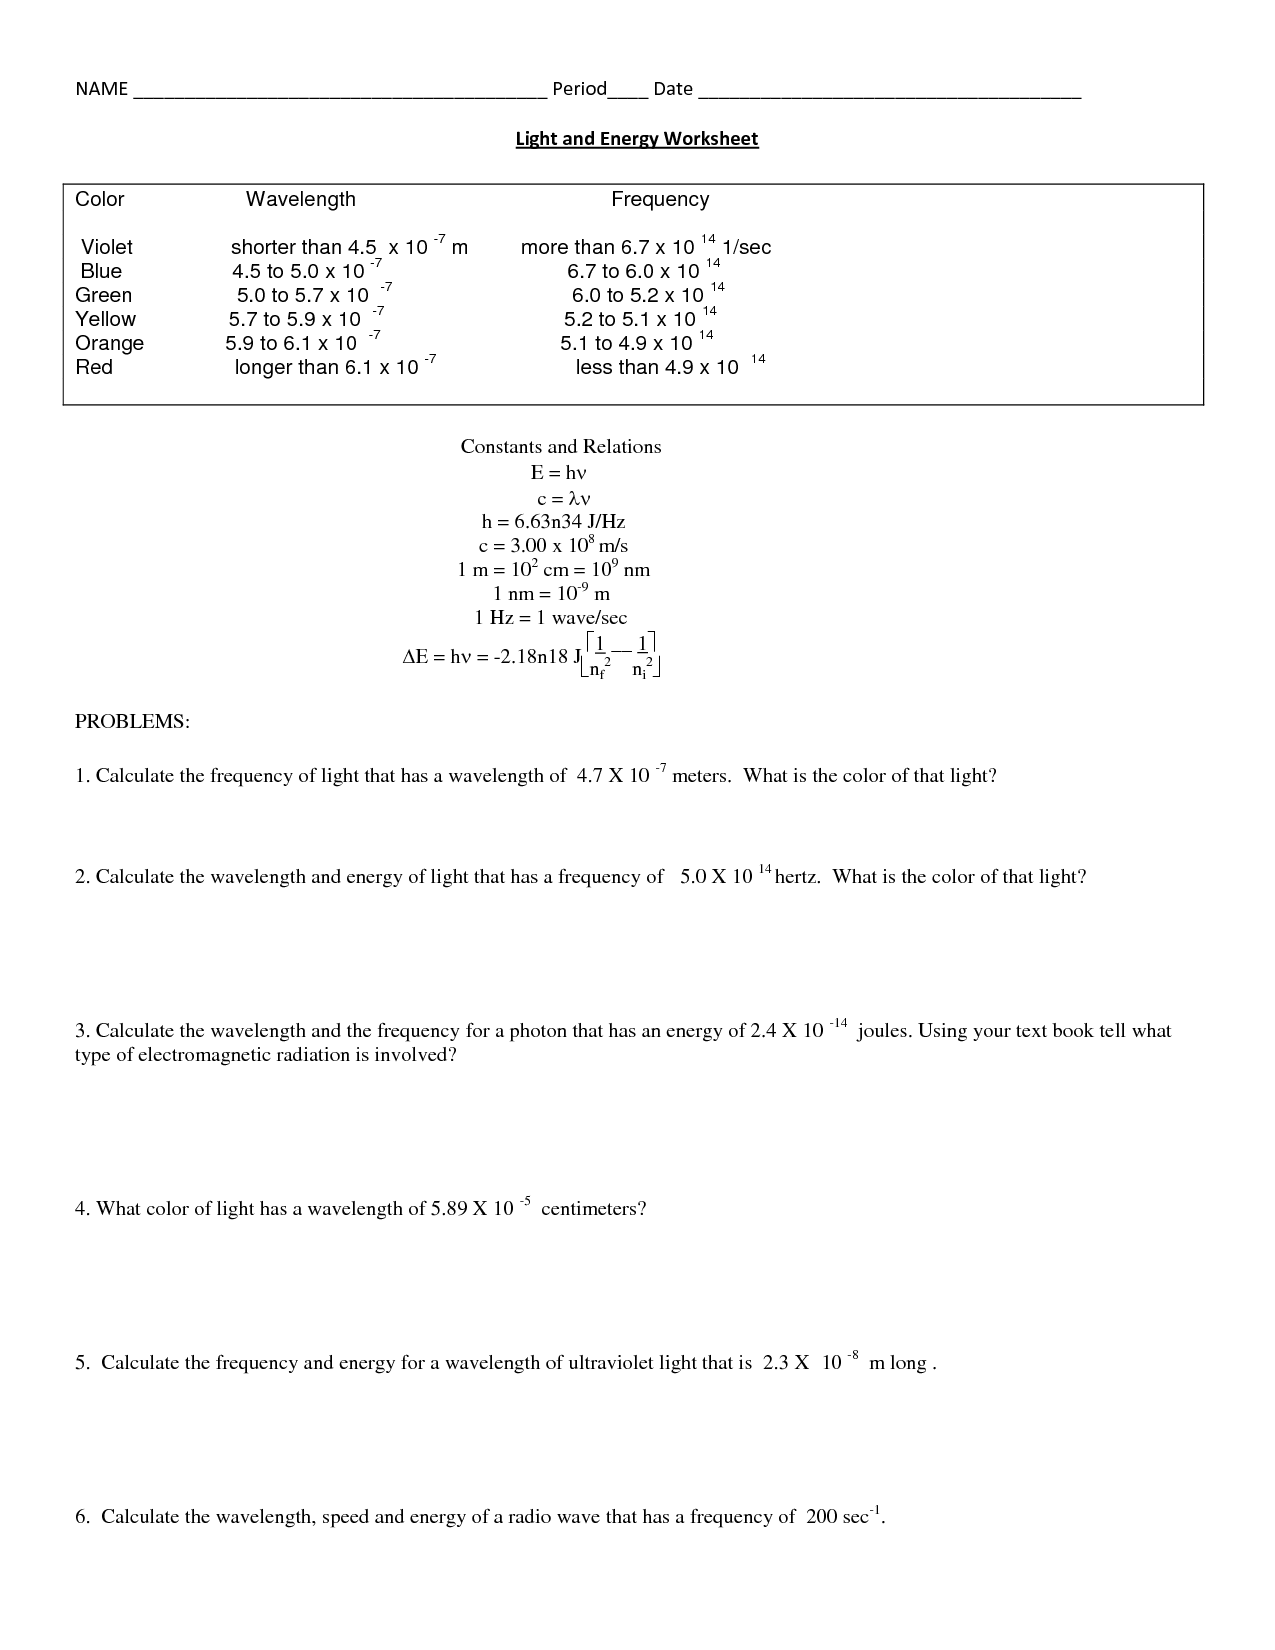 Light Energy Wavelength and Frequency Worksheet Answers Image